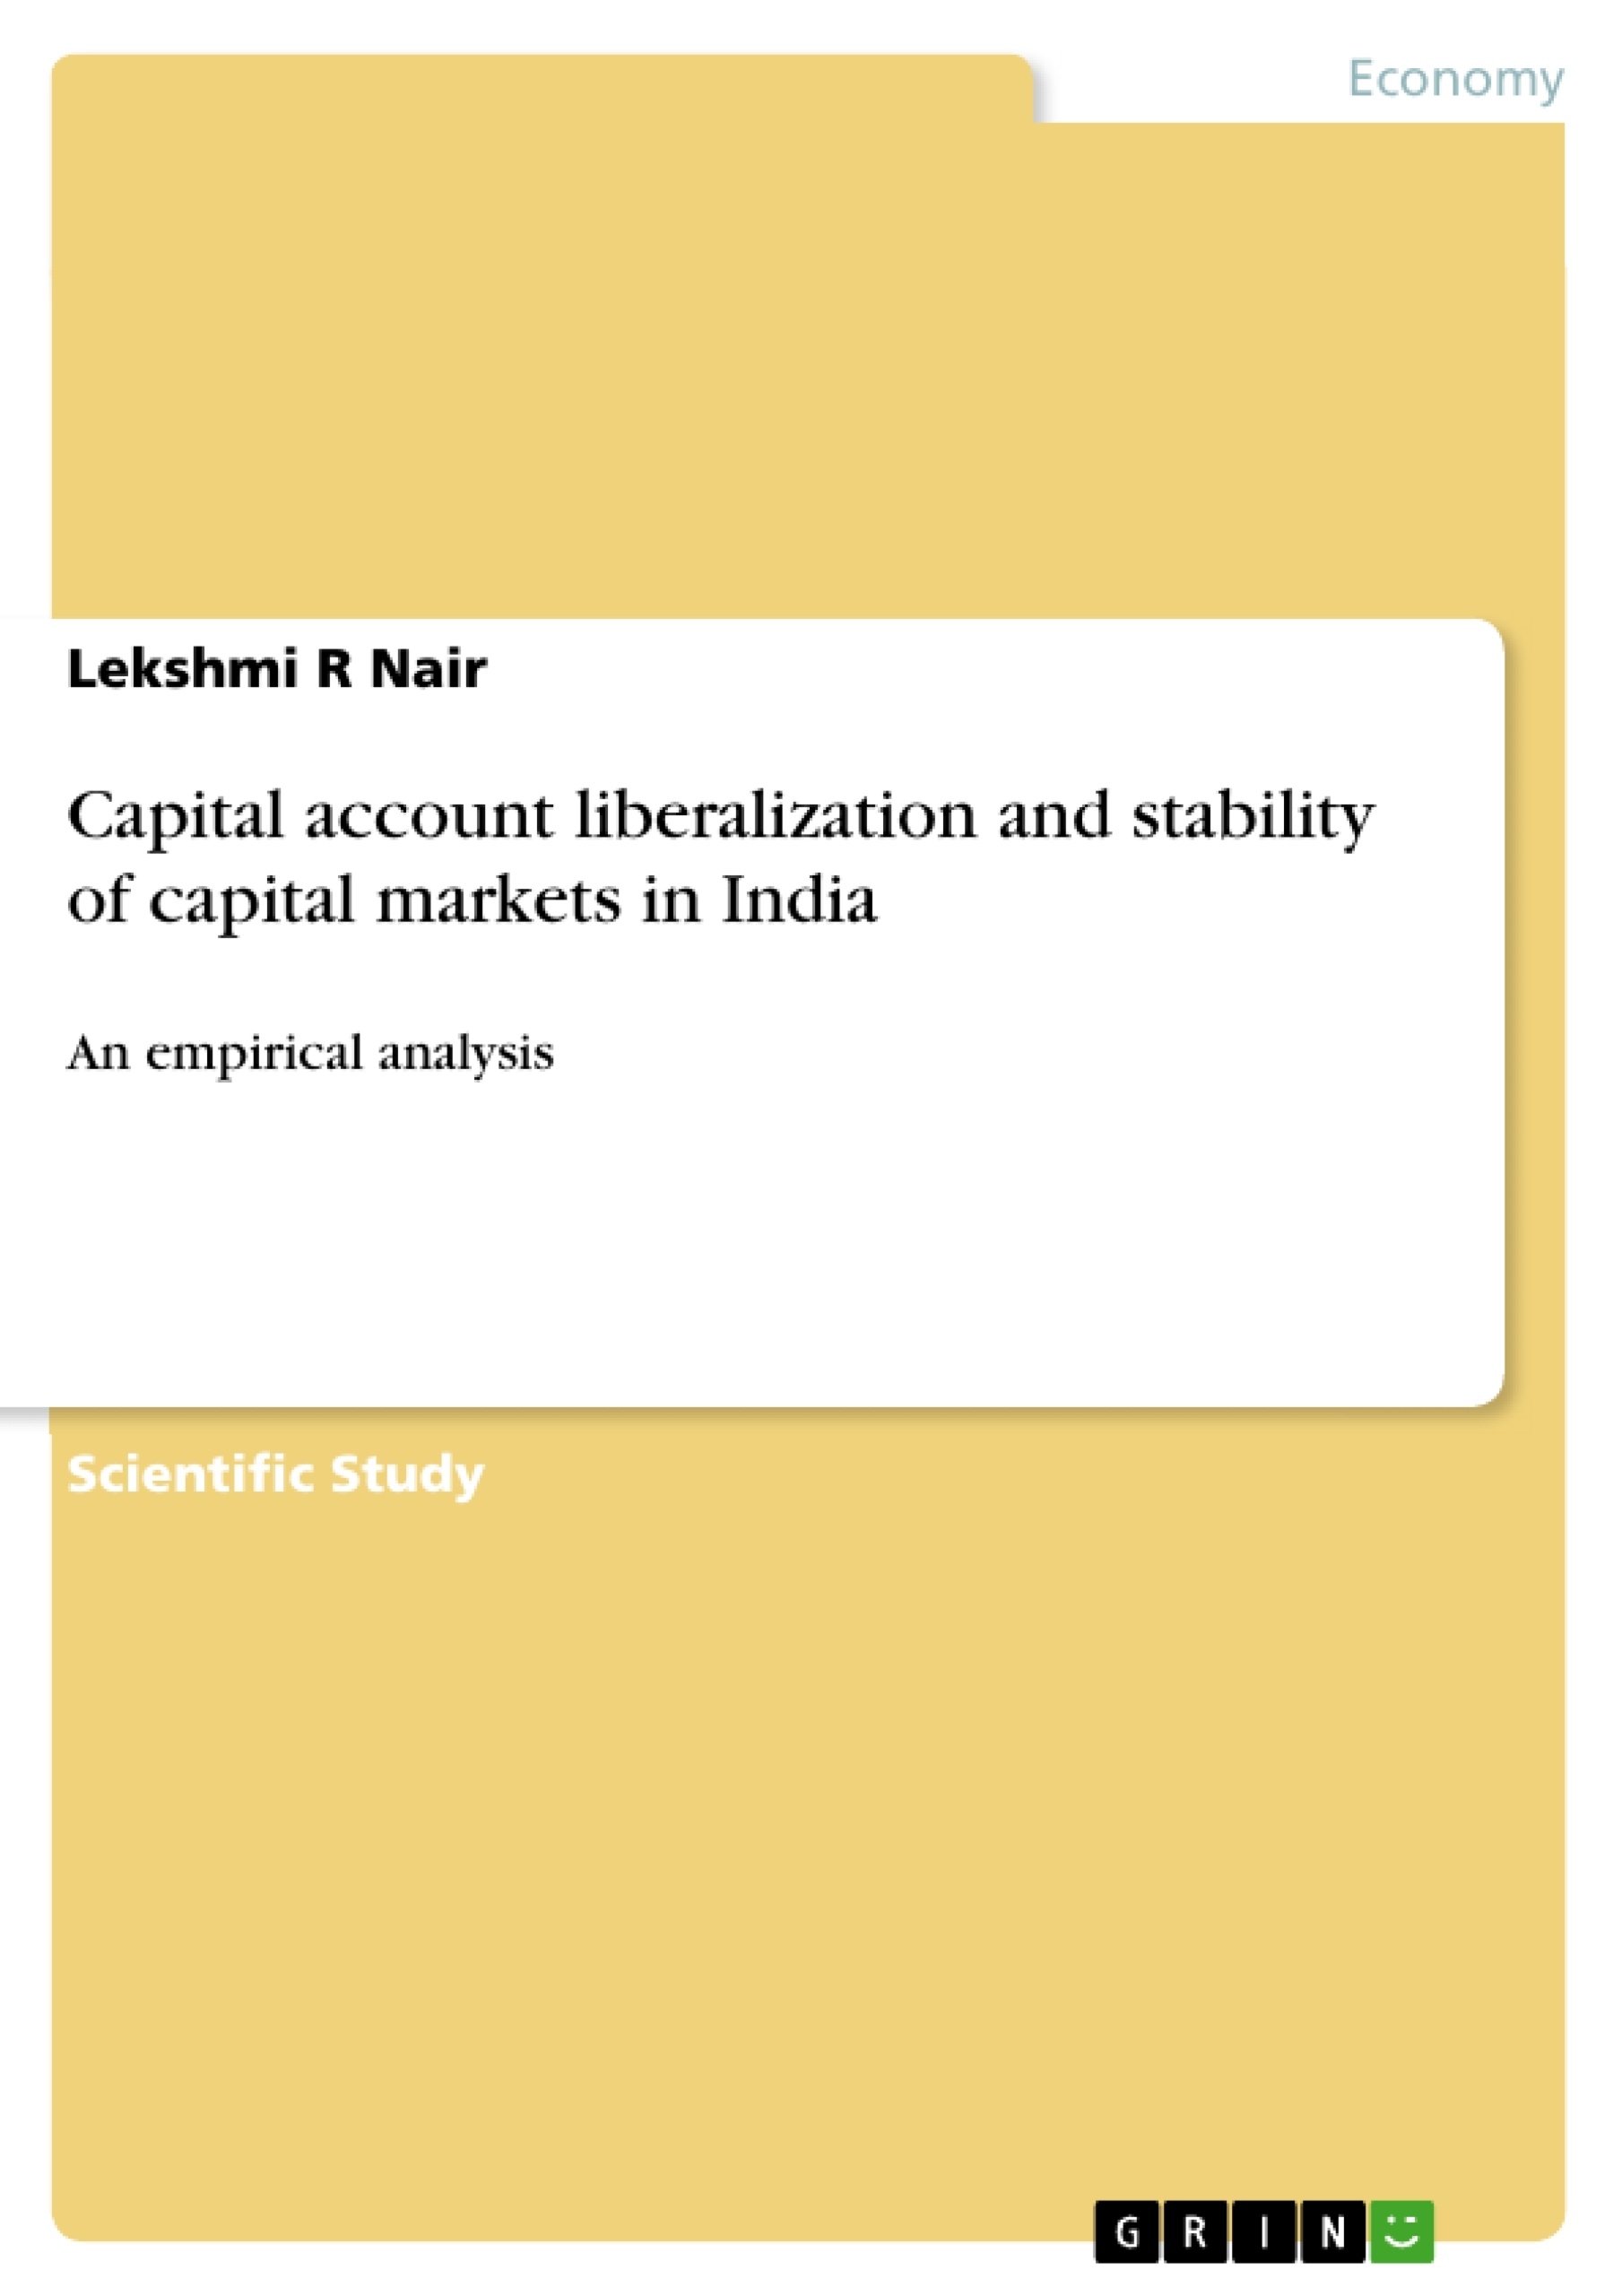 Título: Capital  account  liberalization  and  stability  of  capital  markets  in  India